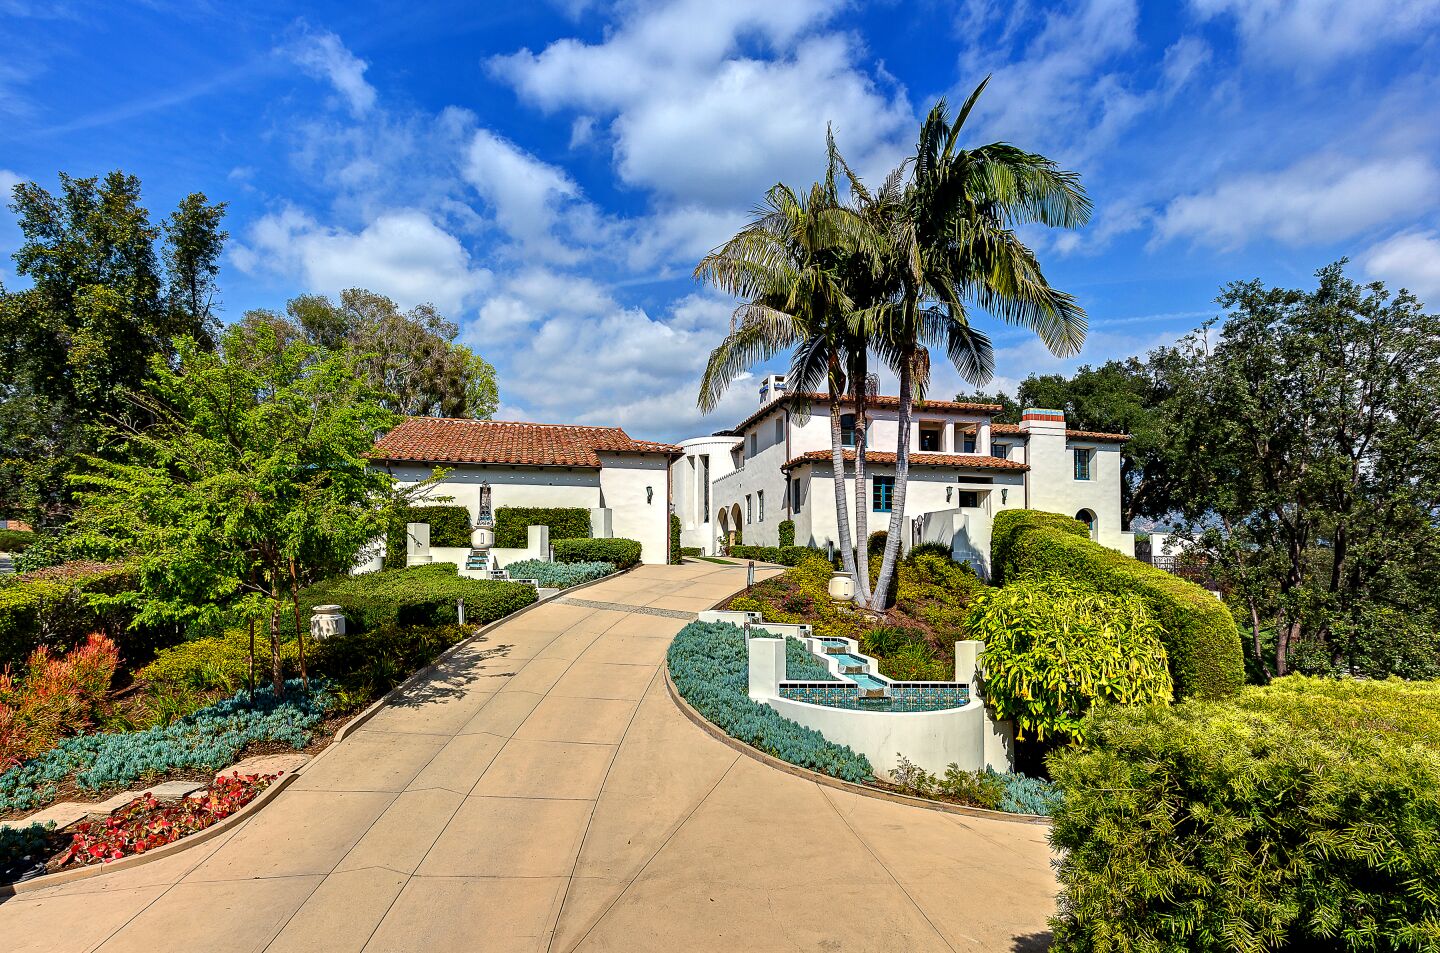 The 1920s mansion blends Spanish Colonial Revival and Art Deco styles across 13,000 square feet.